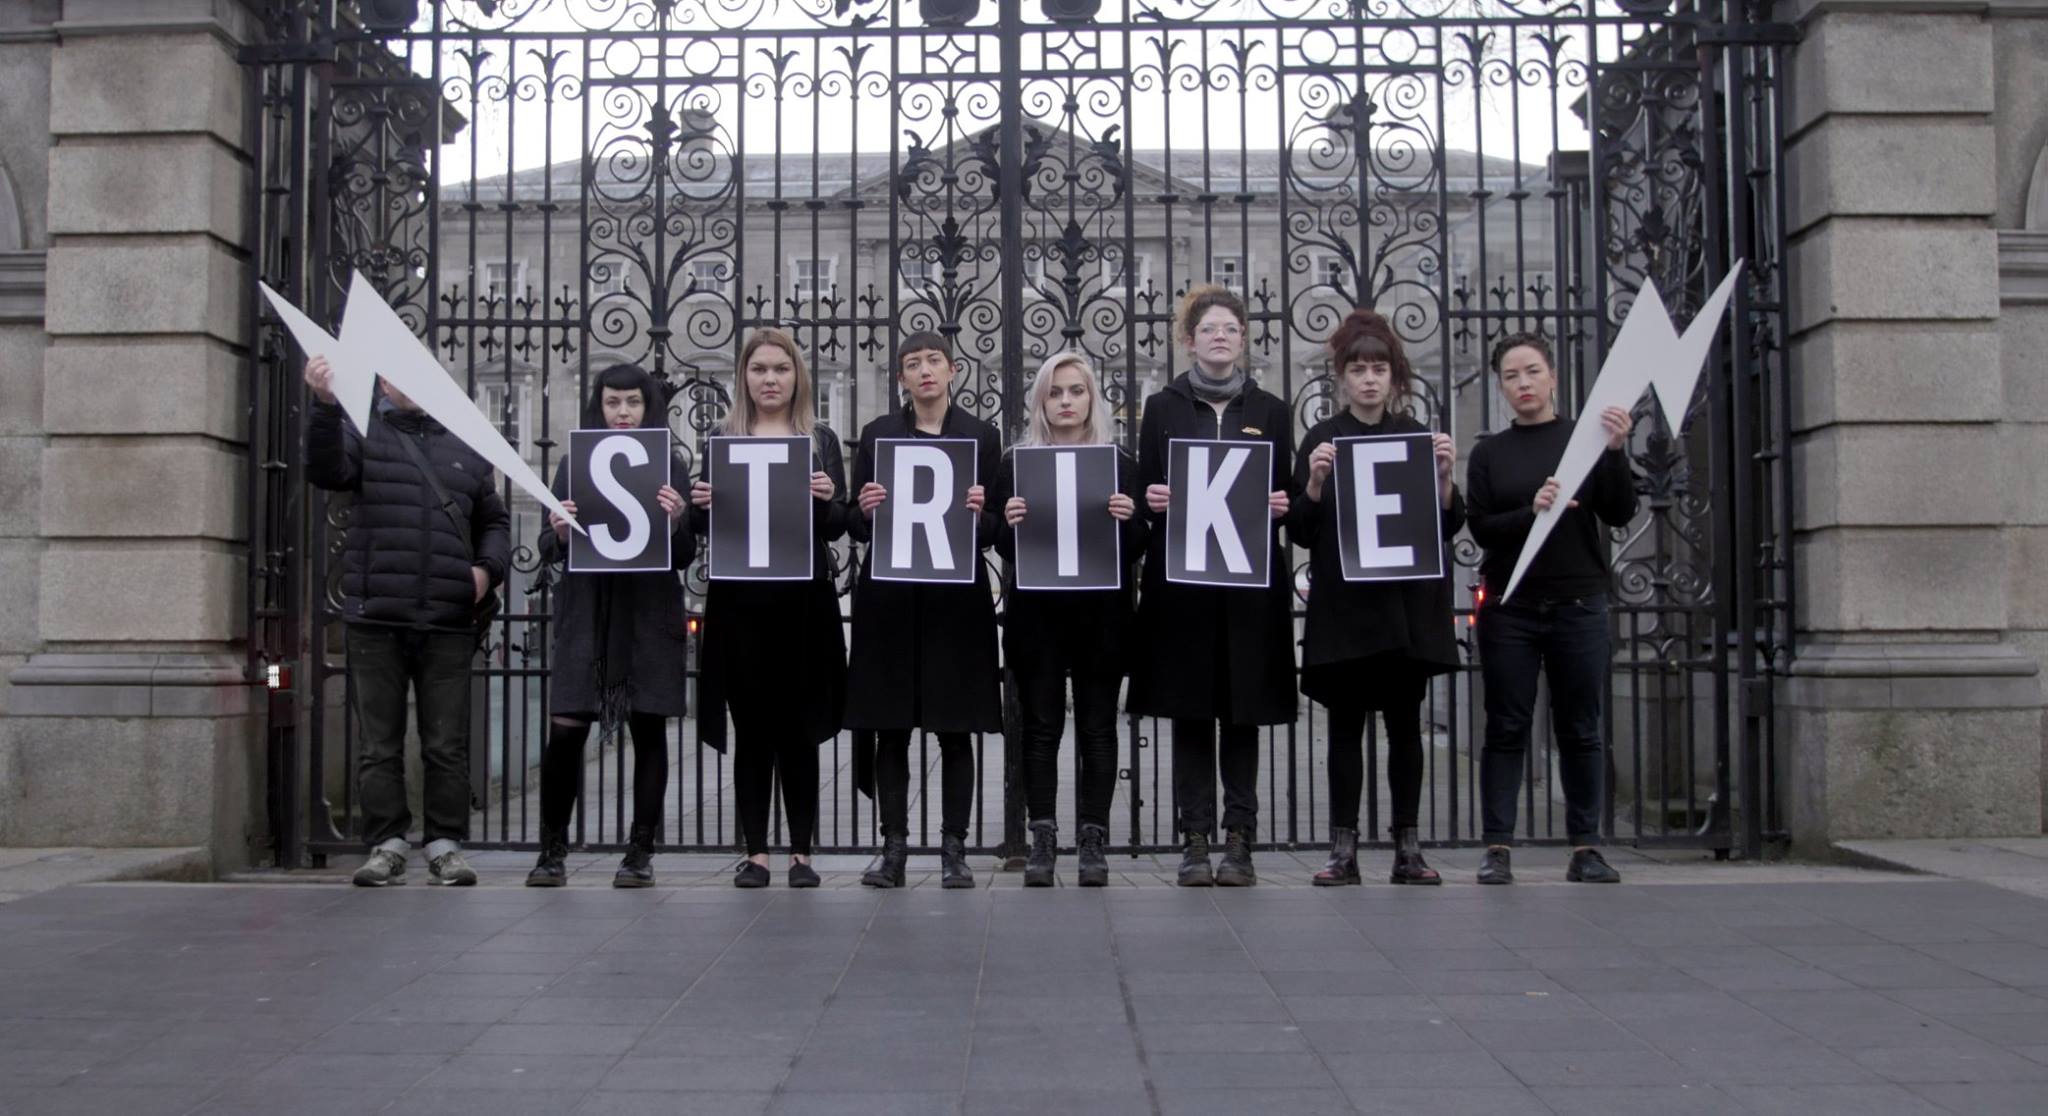 Pro-choice Irish women are going on strike on March 8, in protest of the Catholic country's strict ban on abortion. (Strike 4 Repeal)